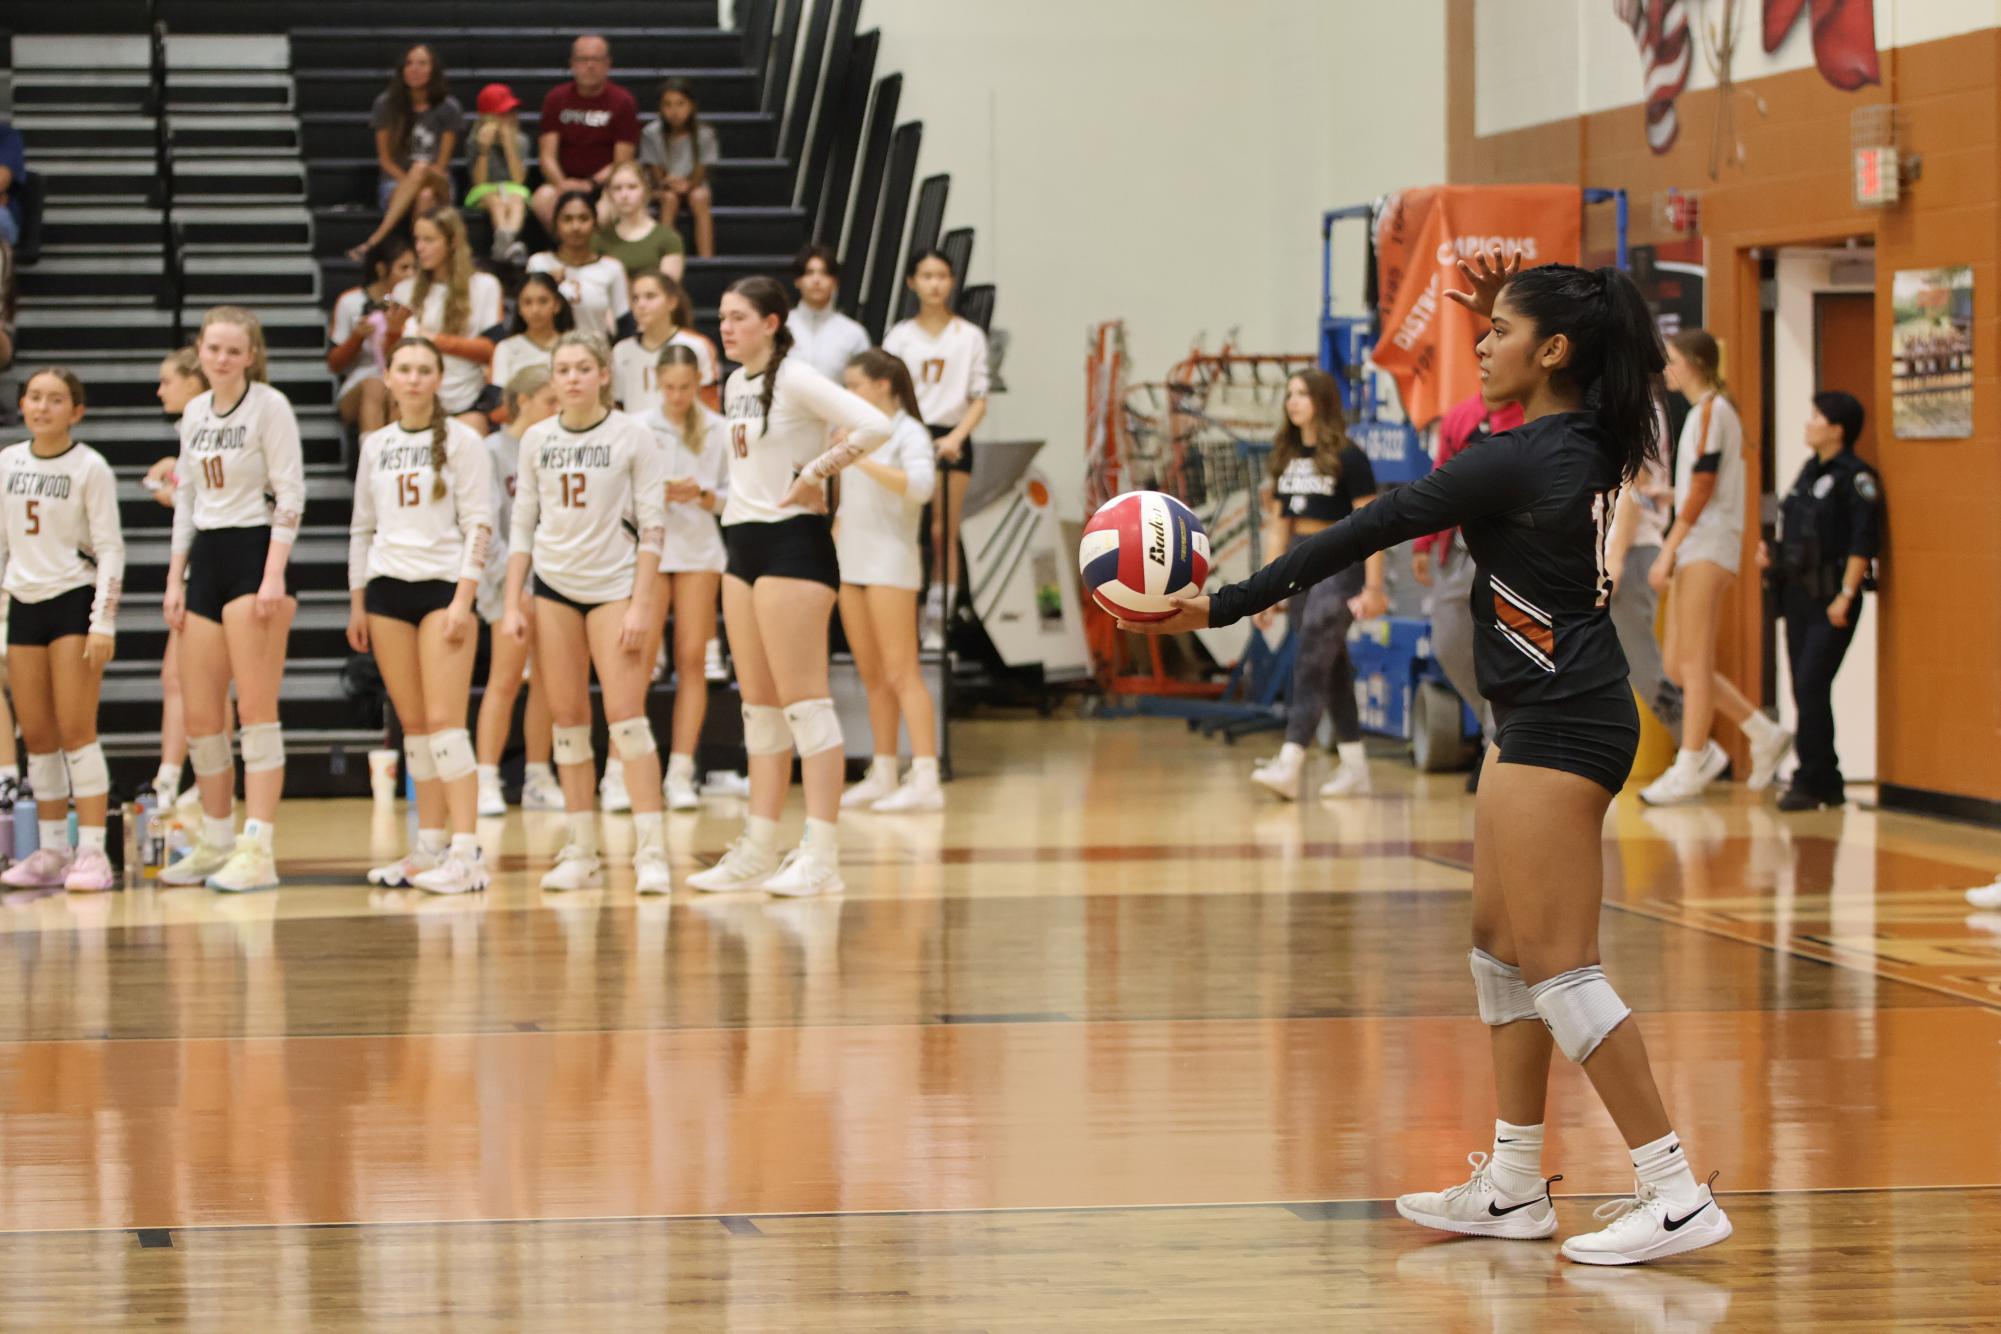 Varsity+Volleyball+Best+St.Stephen%E2%80%99s+3-1+in+Second+Home+Game+of+the+Season